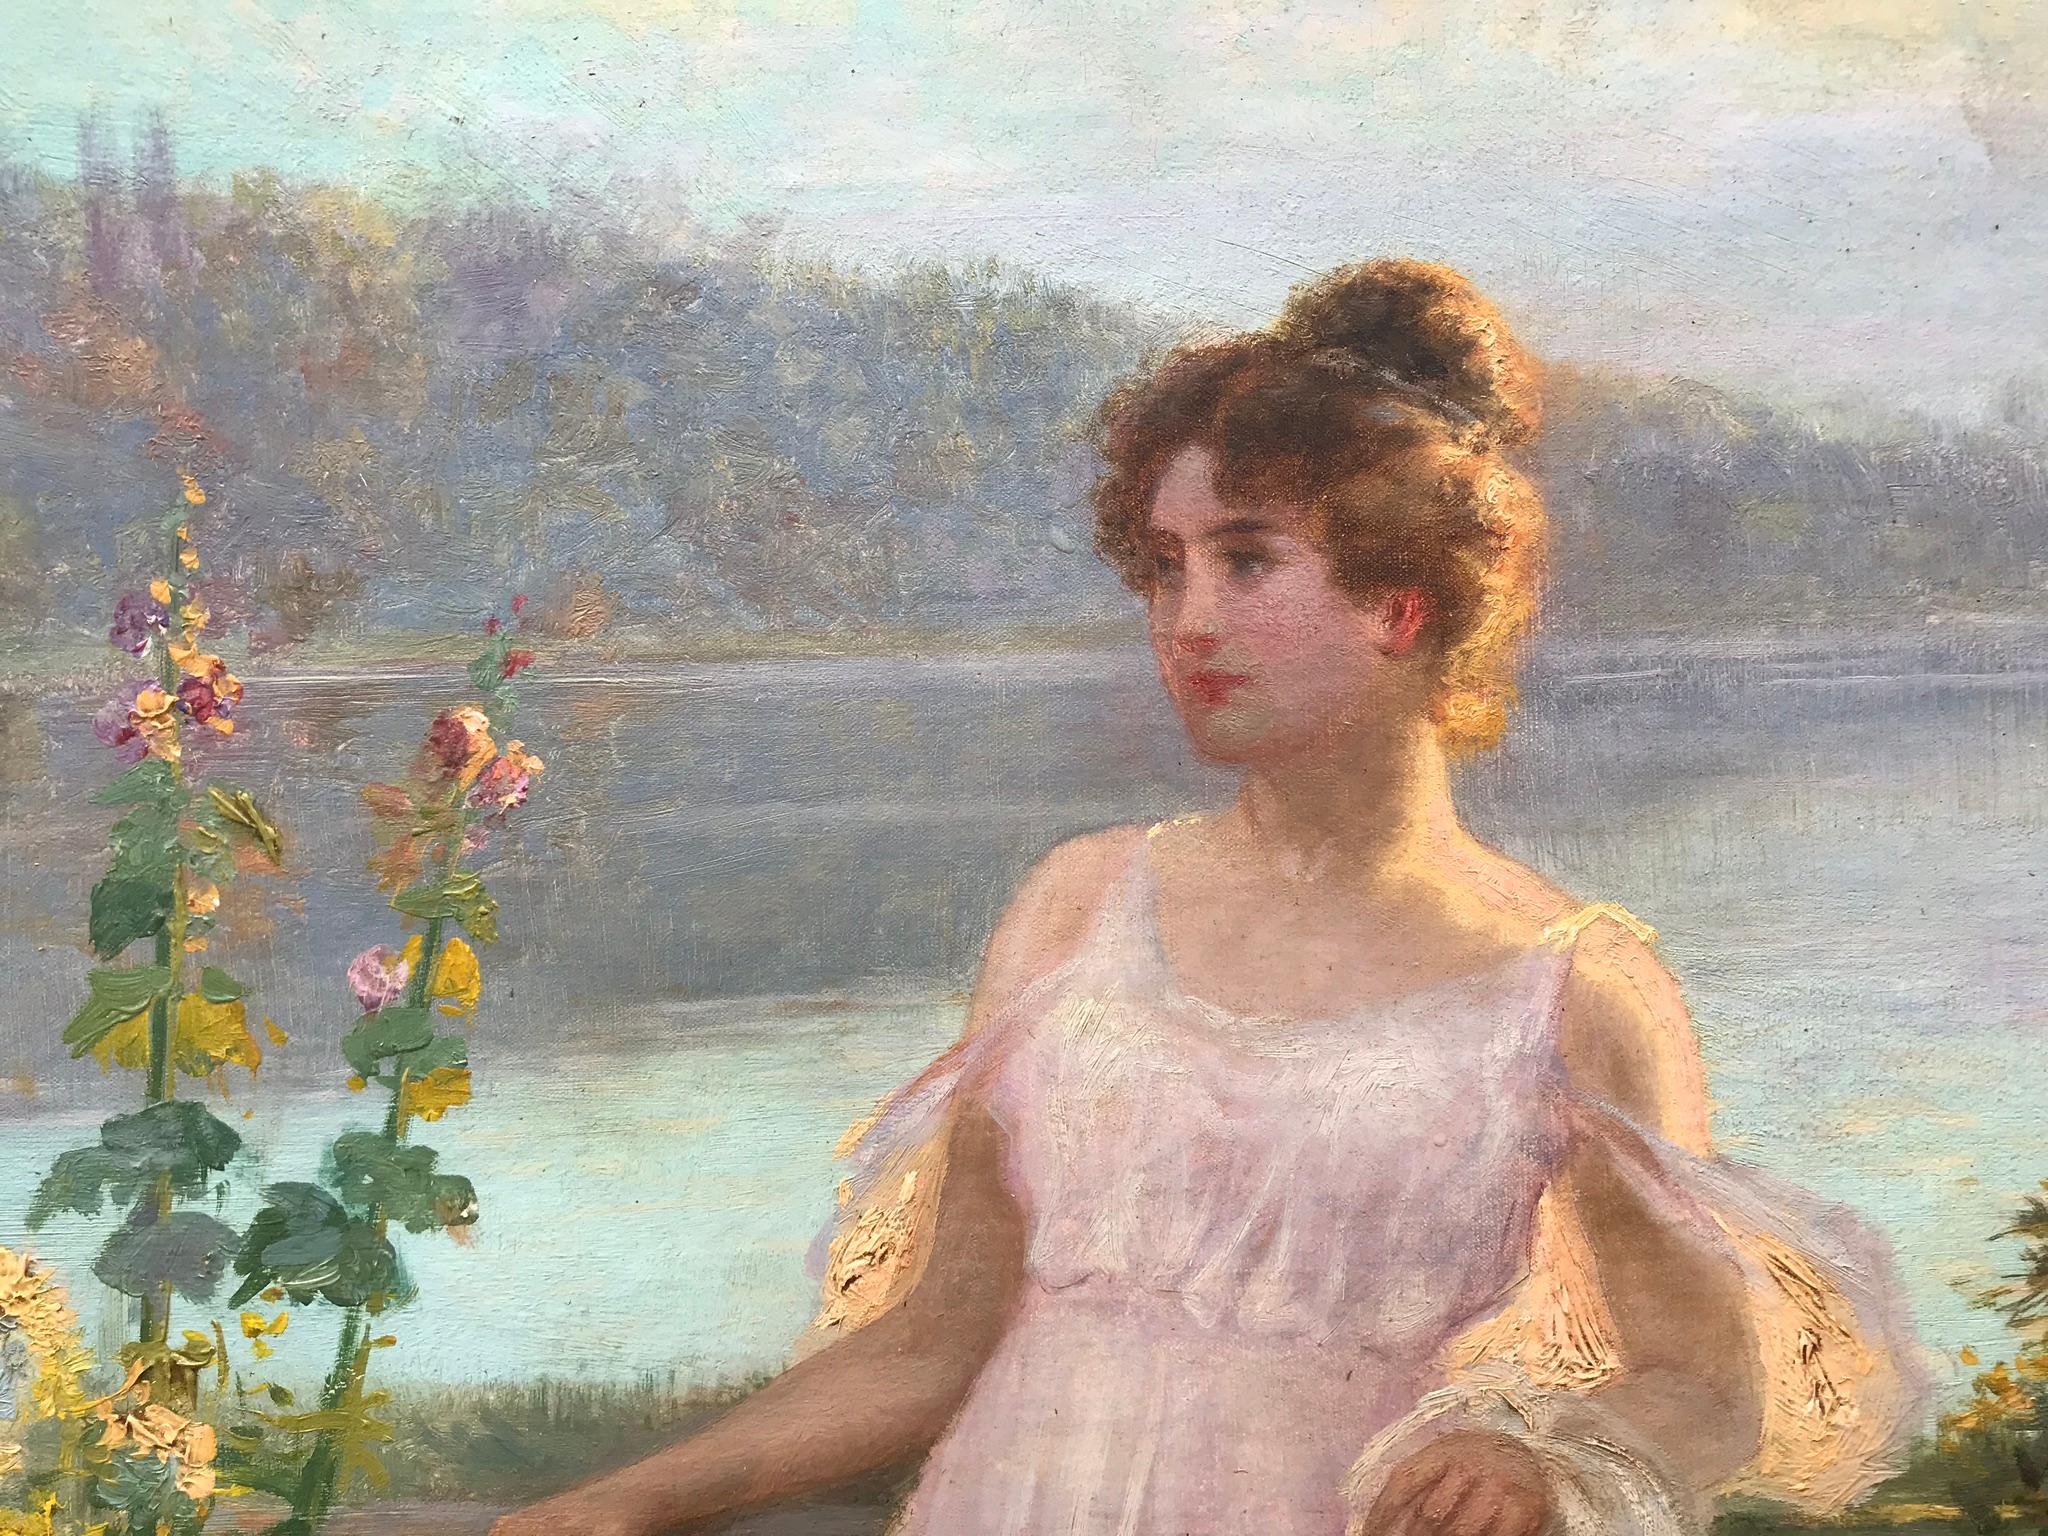 “Lady of the Lake” - Gray Figurative Painting by Jean Beauduin